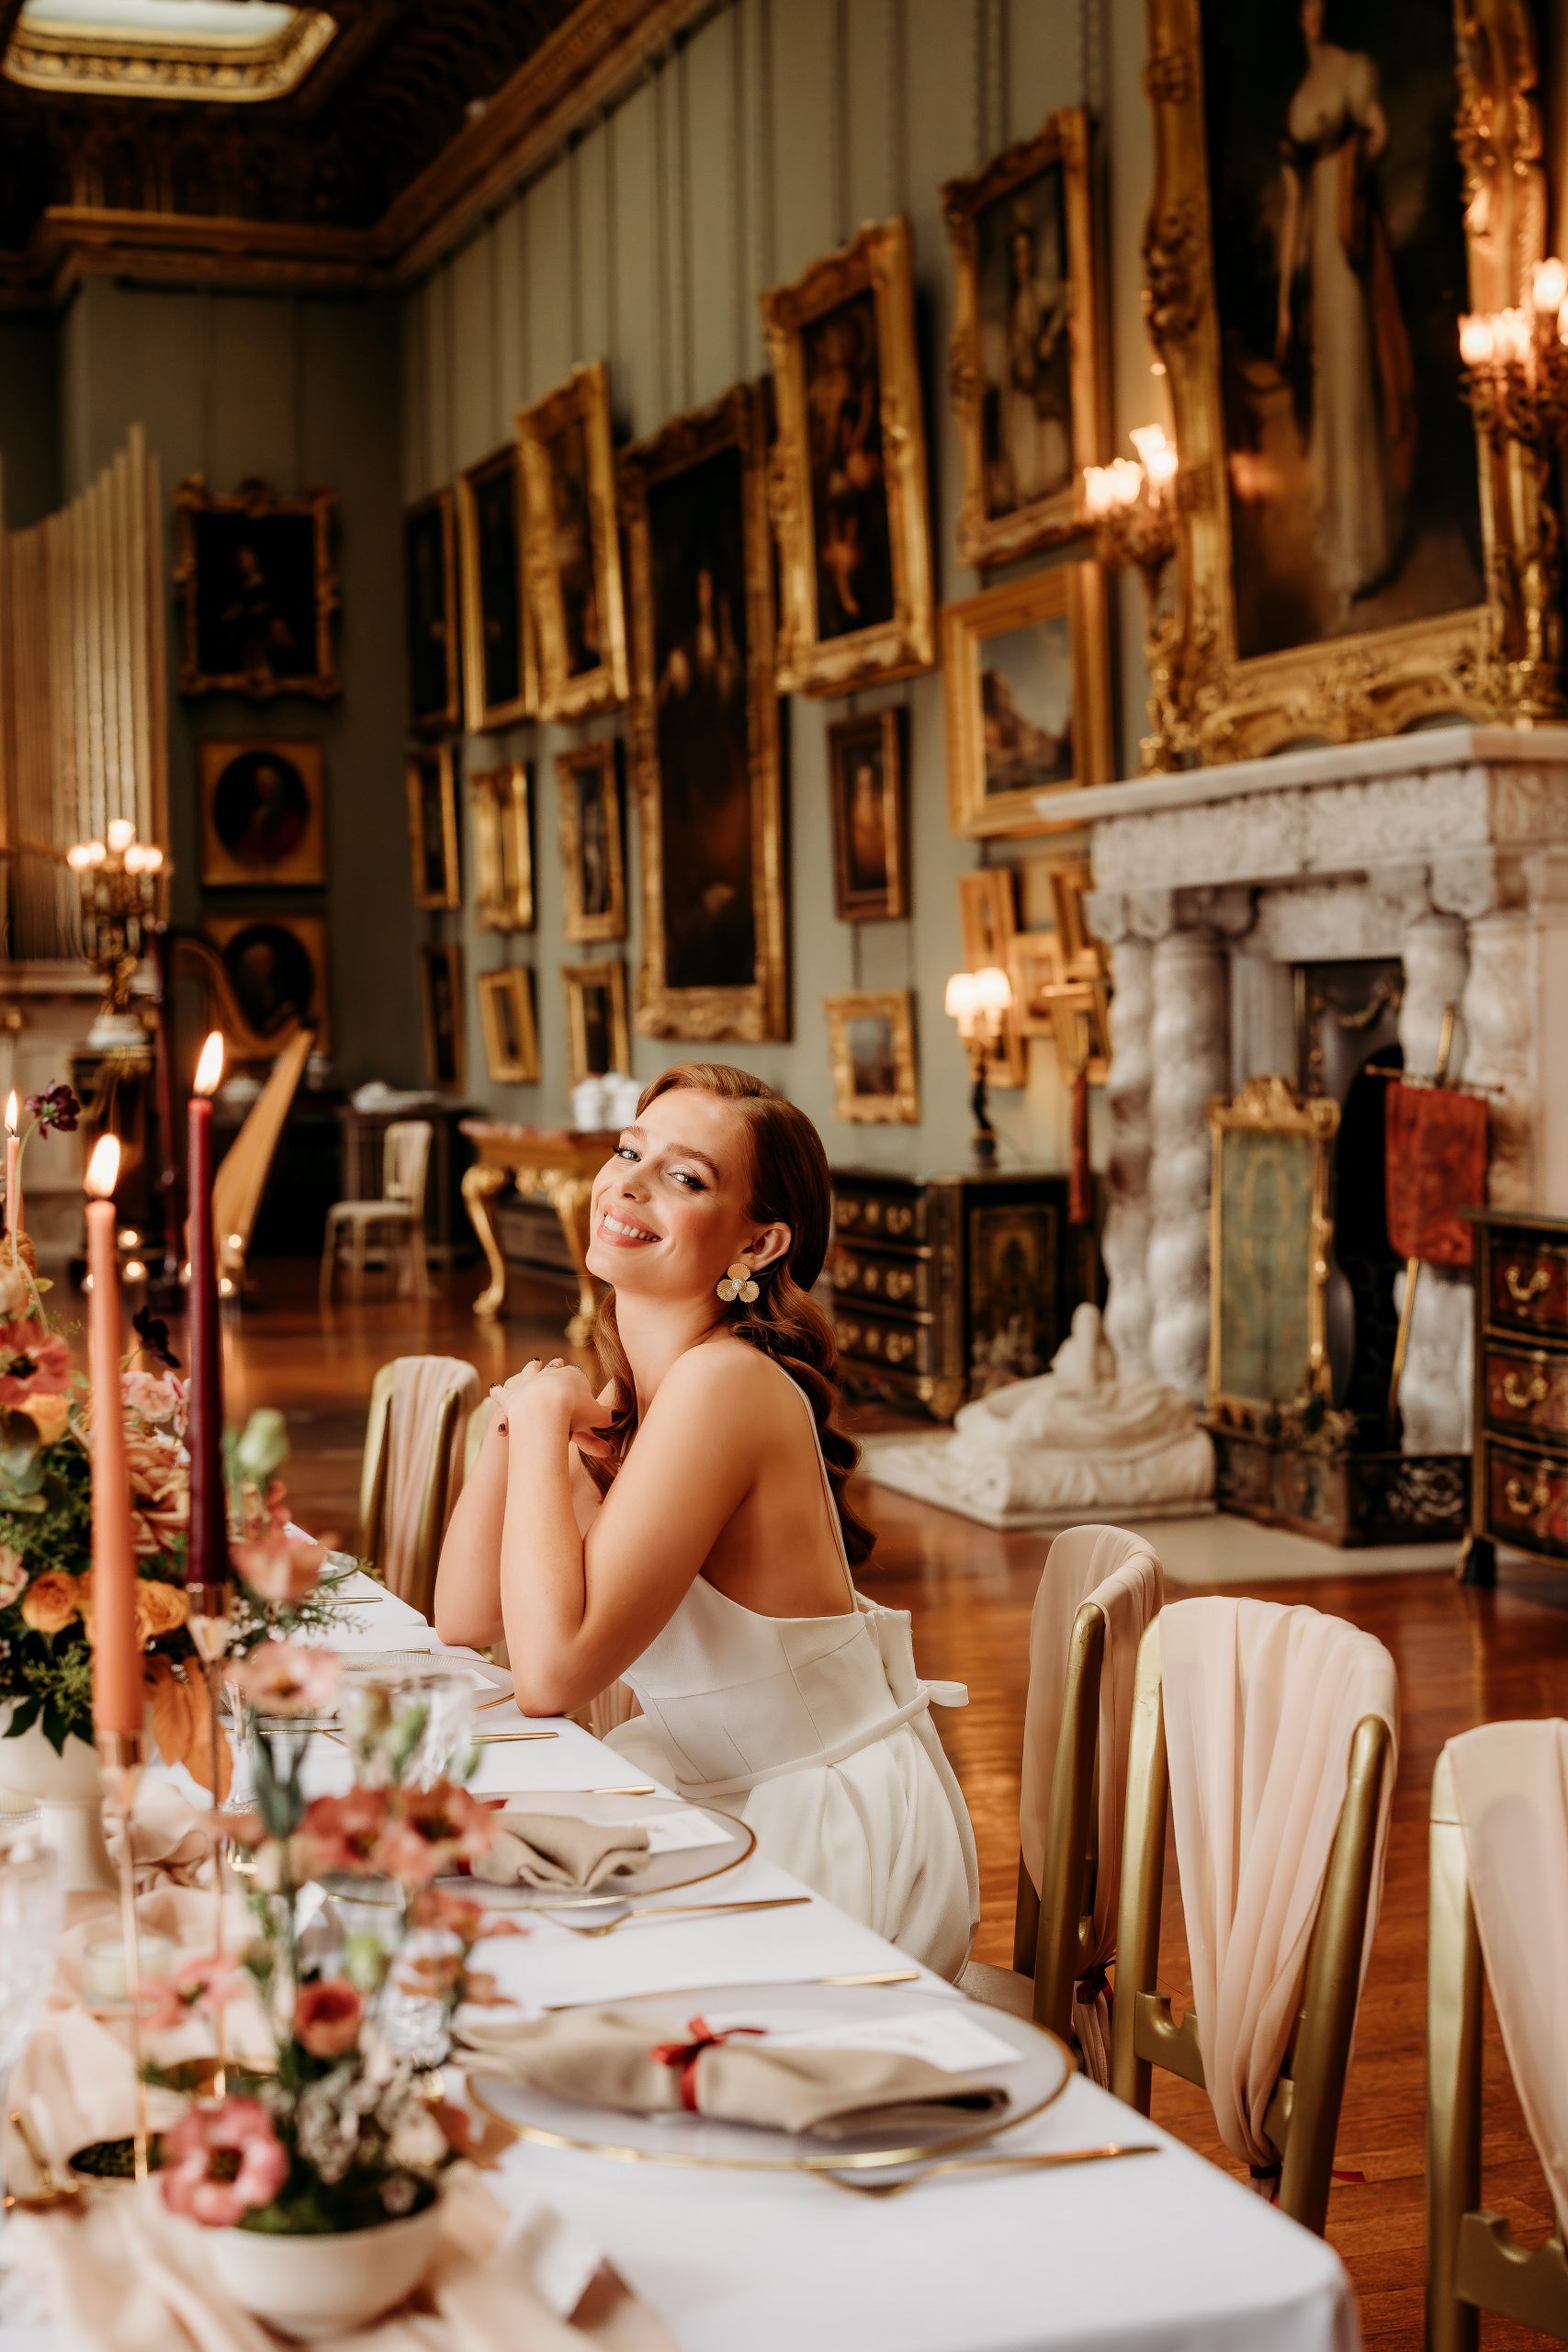 a bride enjoying herself at the table waiting for her husband